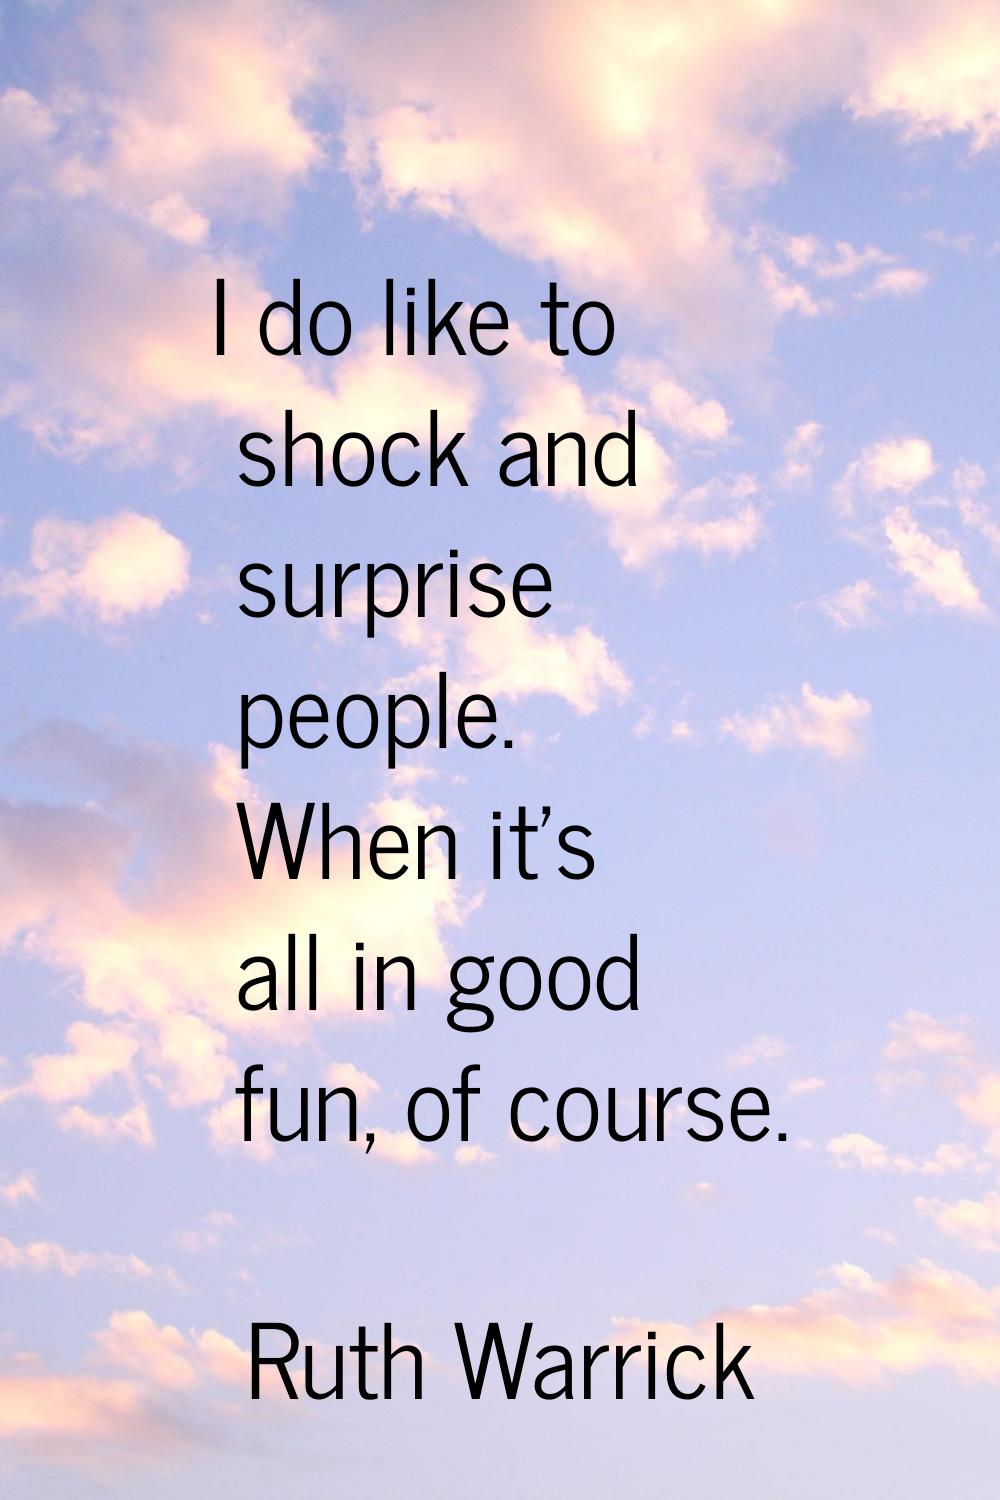 I do like to shock and surprise people. When it's all in good fun, of course.